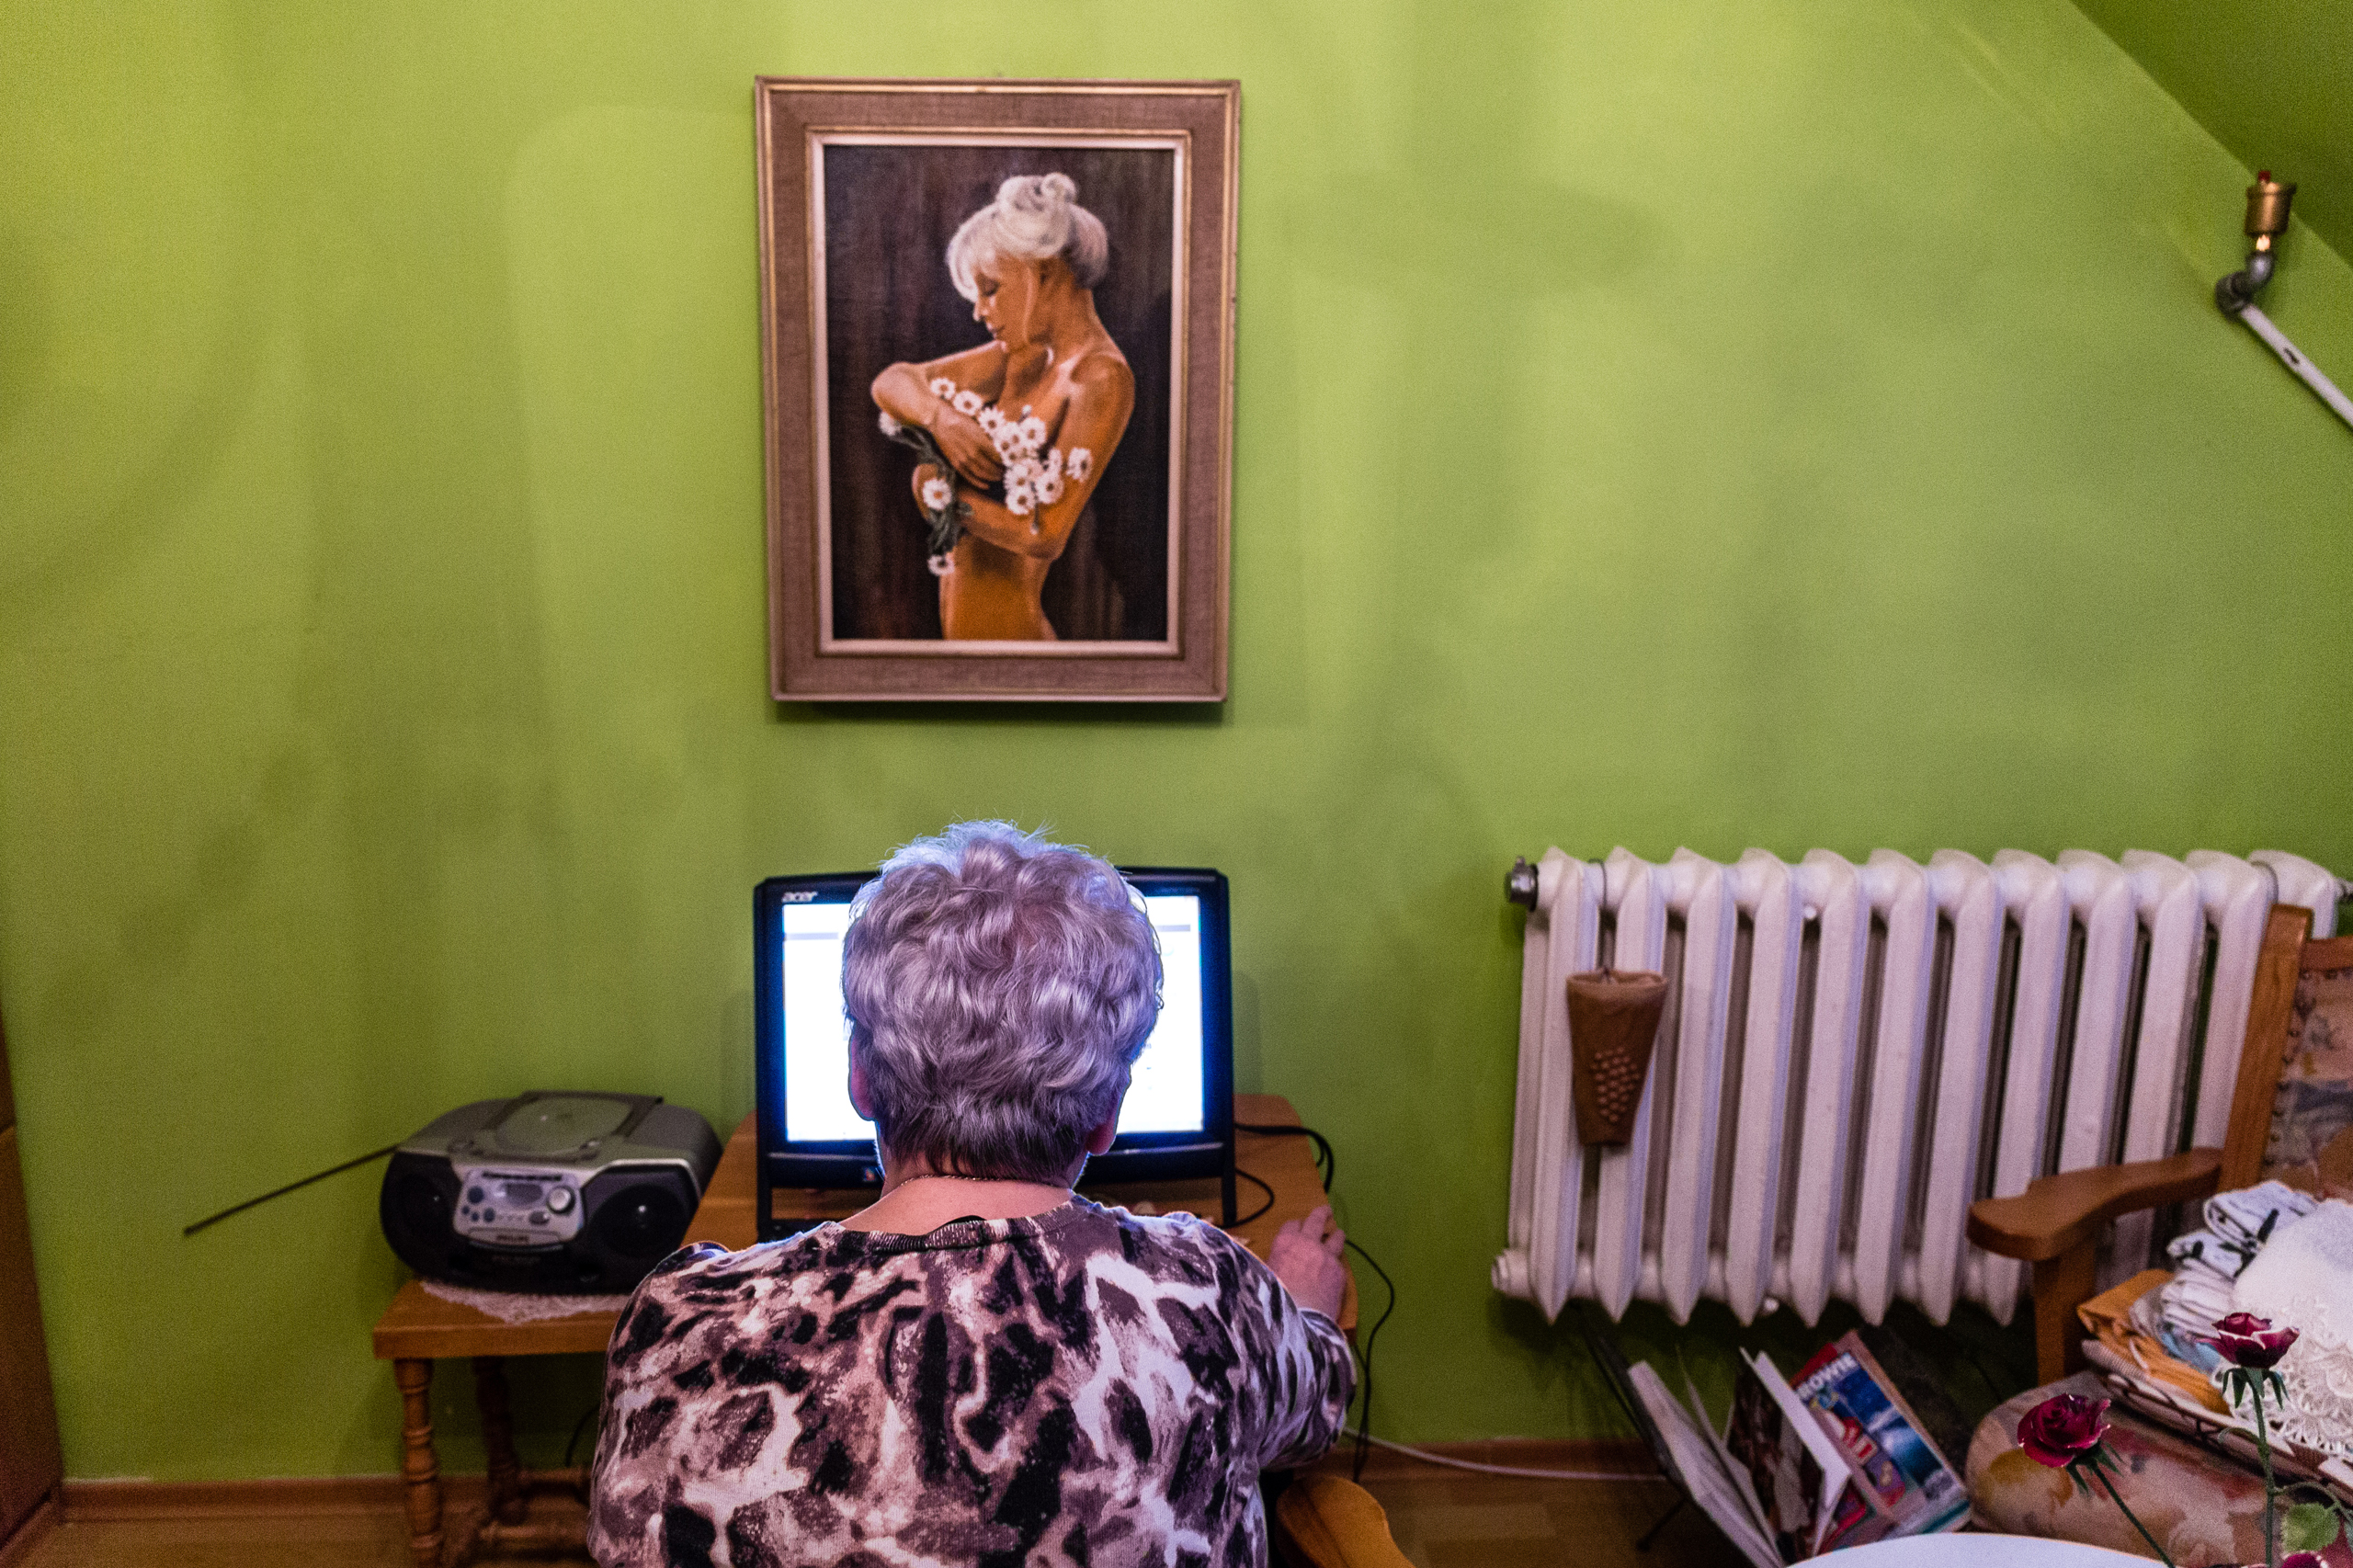 Alicja Bielecka, 85, lives alone in the area in Poland known as the Suwalki Gap which borders the Baltic States, and the Russian enclave of Kaliningrad. She does not trust Russia and is afraid to discuss politics with her friends at the senior center, January 2017.